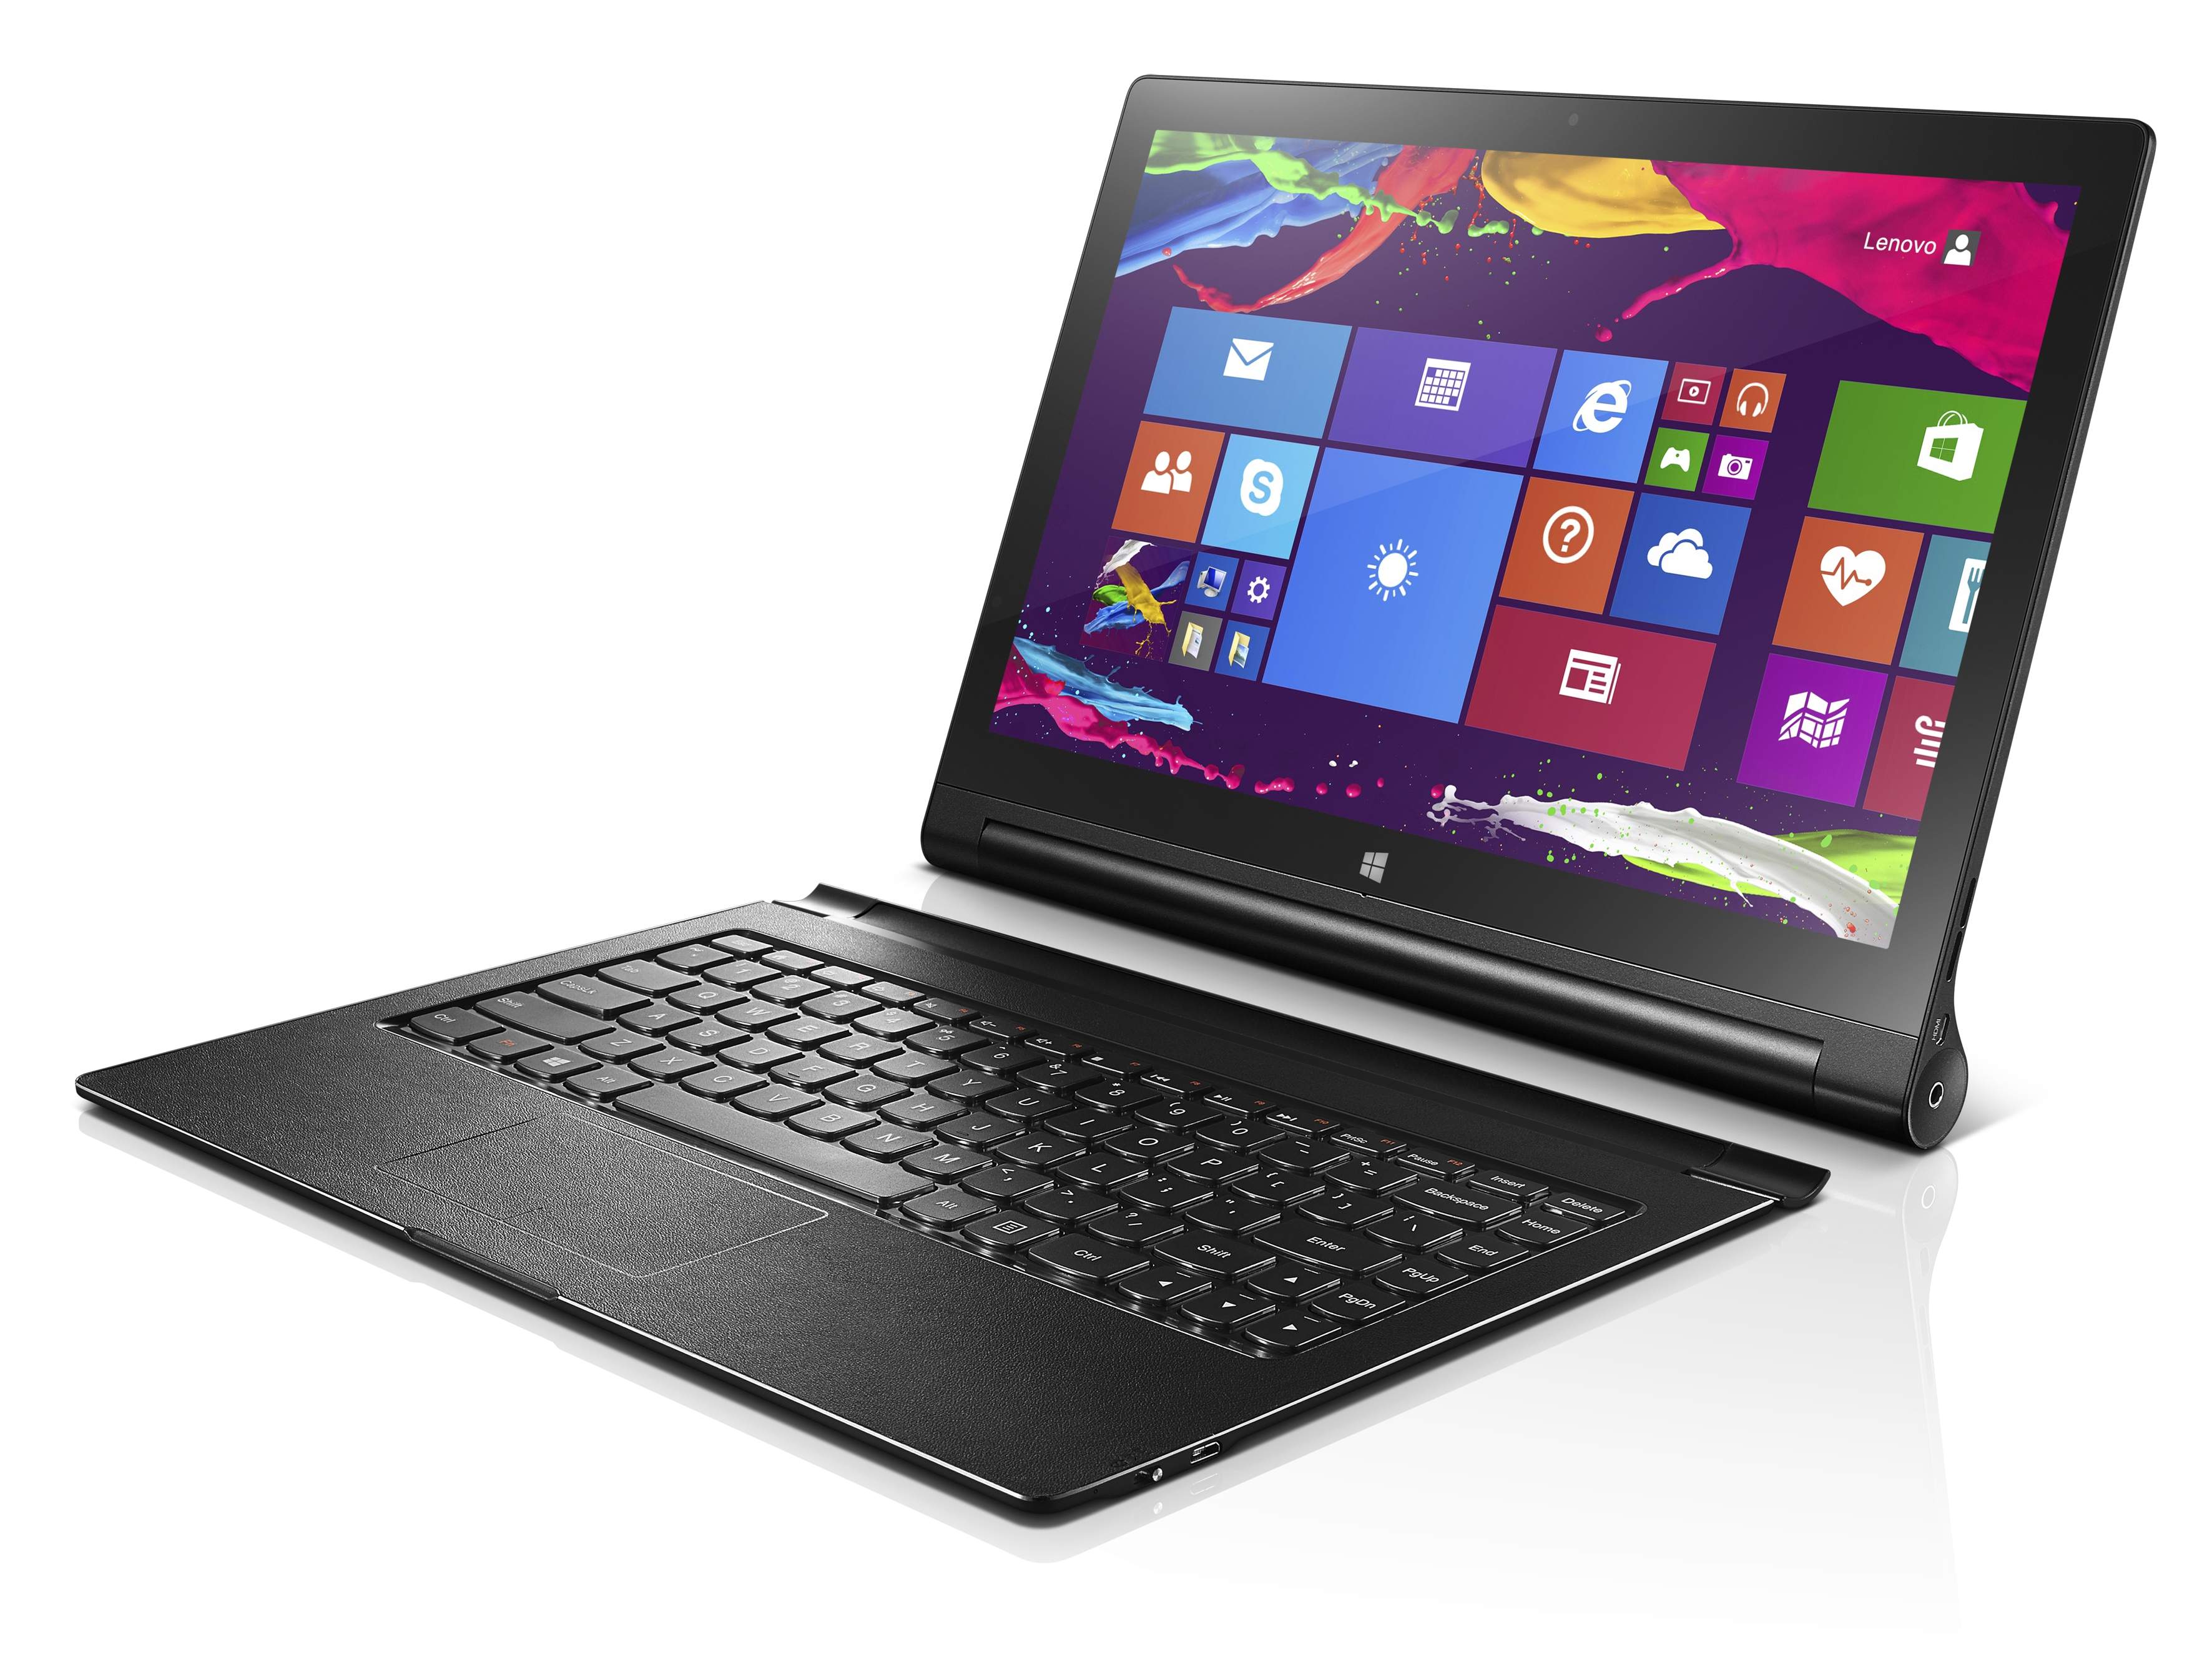 Lenovo unveils the 13-inch Yoga Tablet 2 with Windows